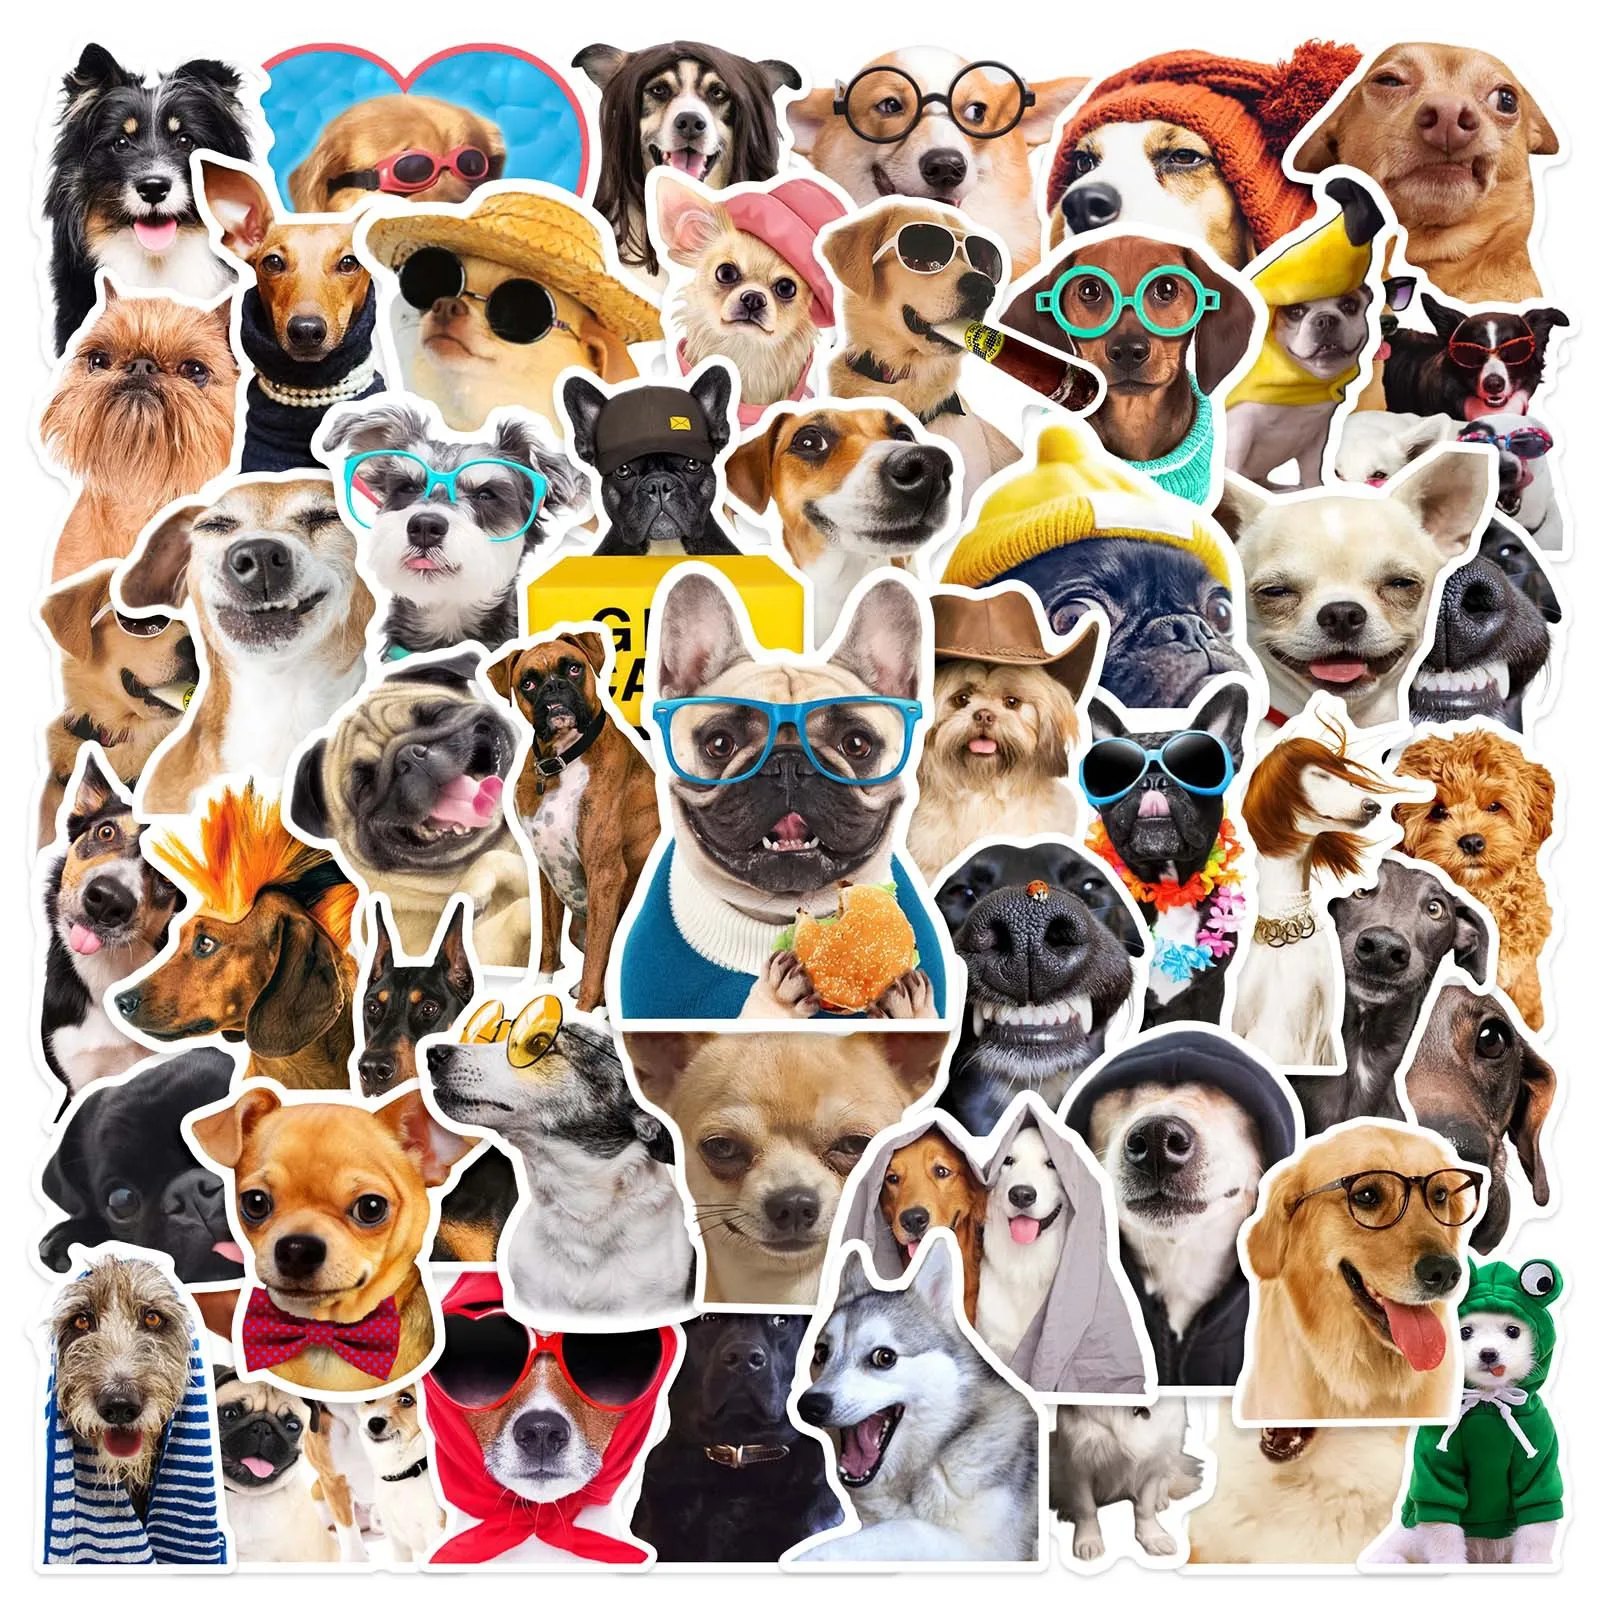 10/30/50pcs Funny Cool  Dog Graffiti Sticker Water Cup Mobile Phone Tablet Luggage Guitar Speaker Helmet Diy Waterproof Sticker 10 30 50pcs car graffiti stickers suitcases laptops mobile phone guitar water cup car motorcycle helmet water proof stickers